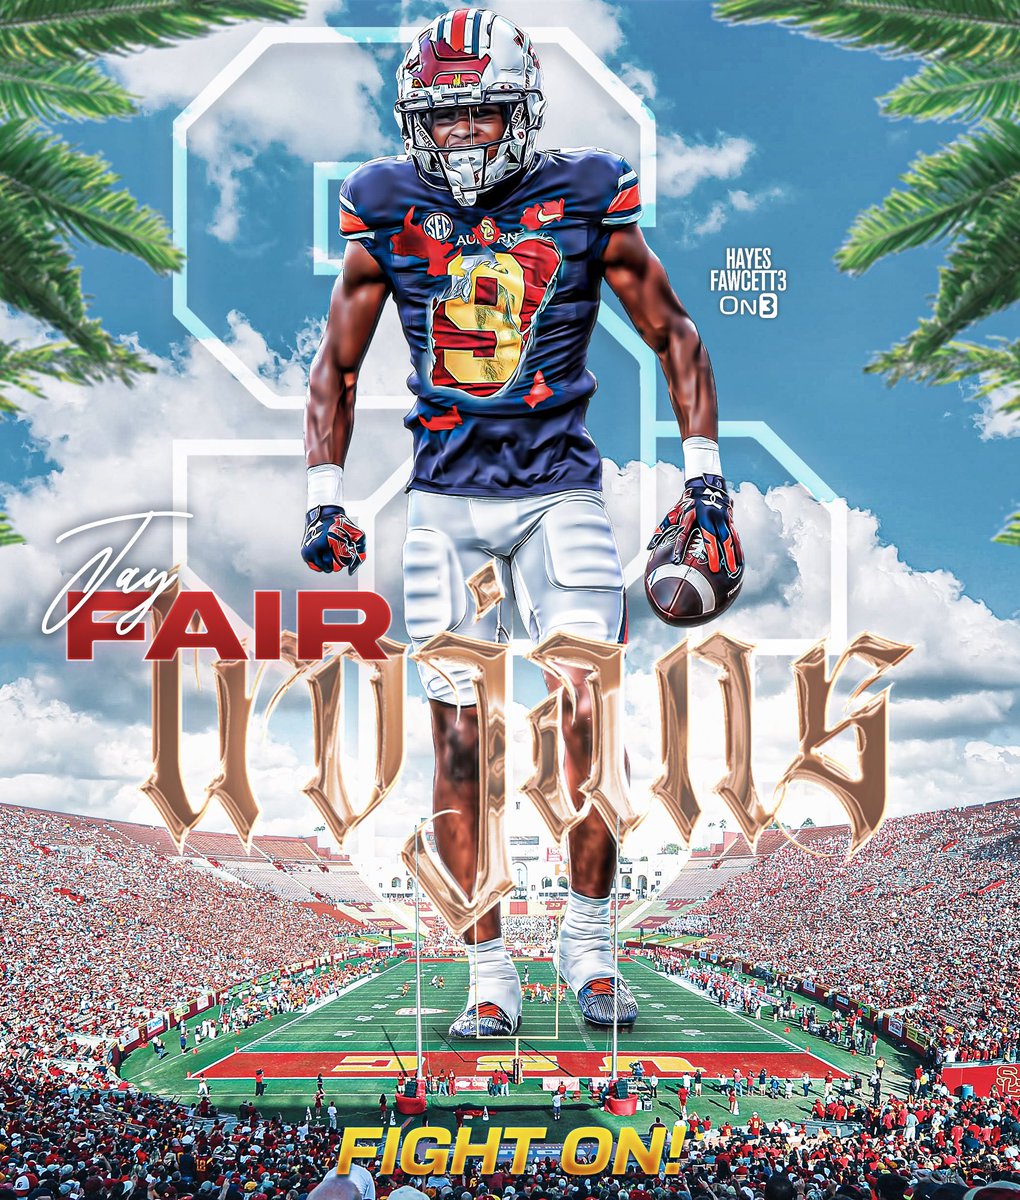 BREAKING: Former Auburn WR Jay Fair has Committed to USC, he tells @on3sports The 5’11 186 WR was a 2 year starter for the Tigers Was 2nd on the team in yards & receptions, & averaged 11 yards per catch in 2023 Will have 2 years of eligibility remaining